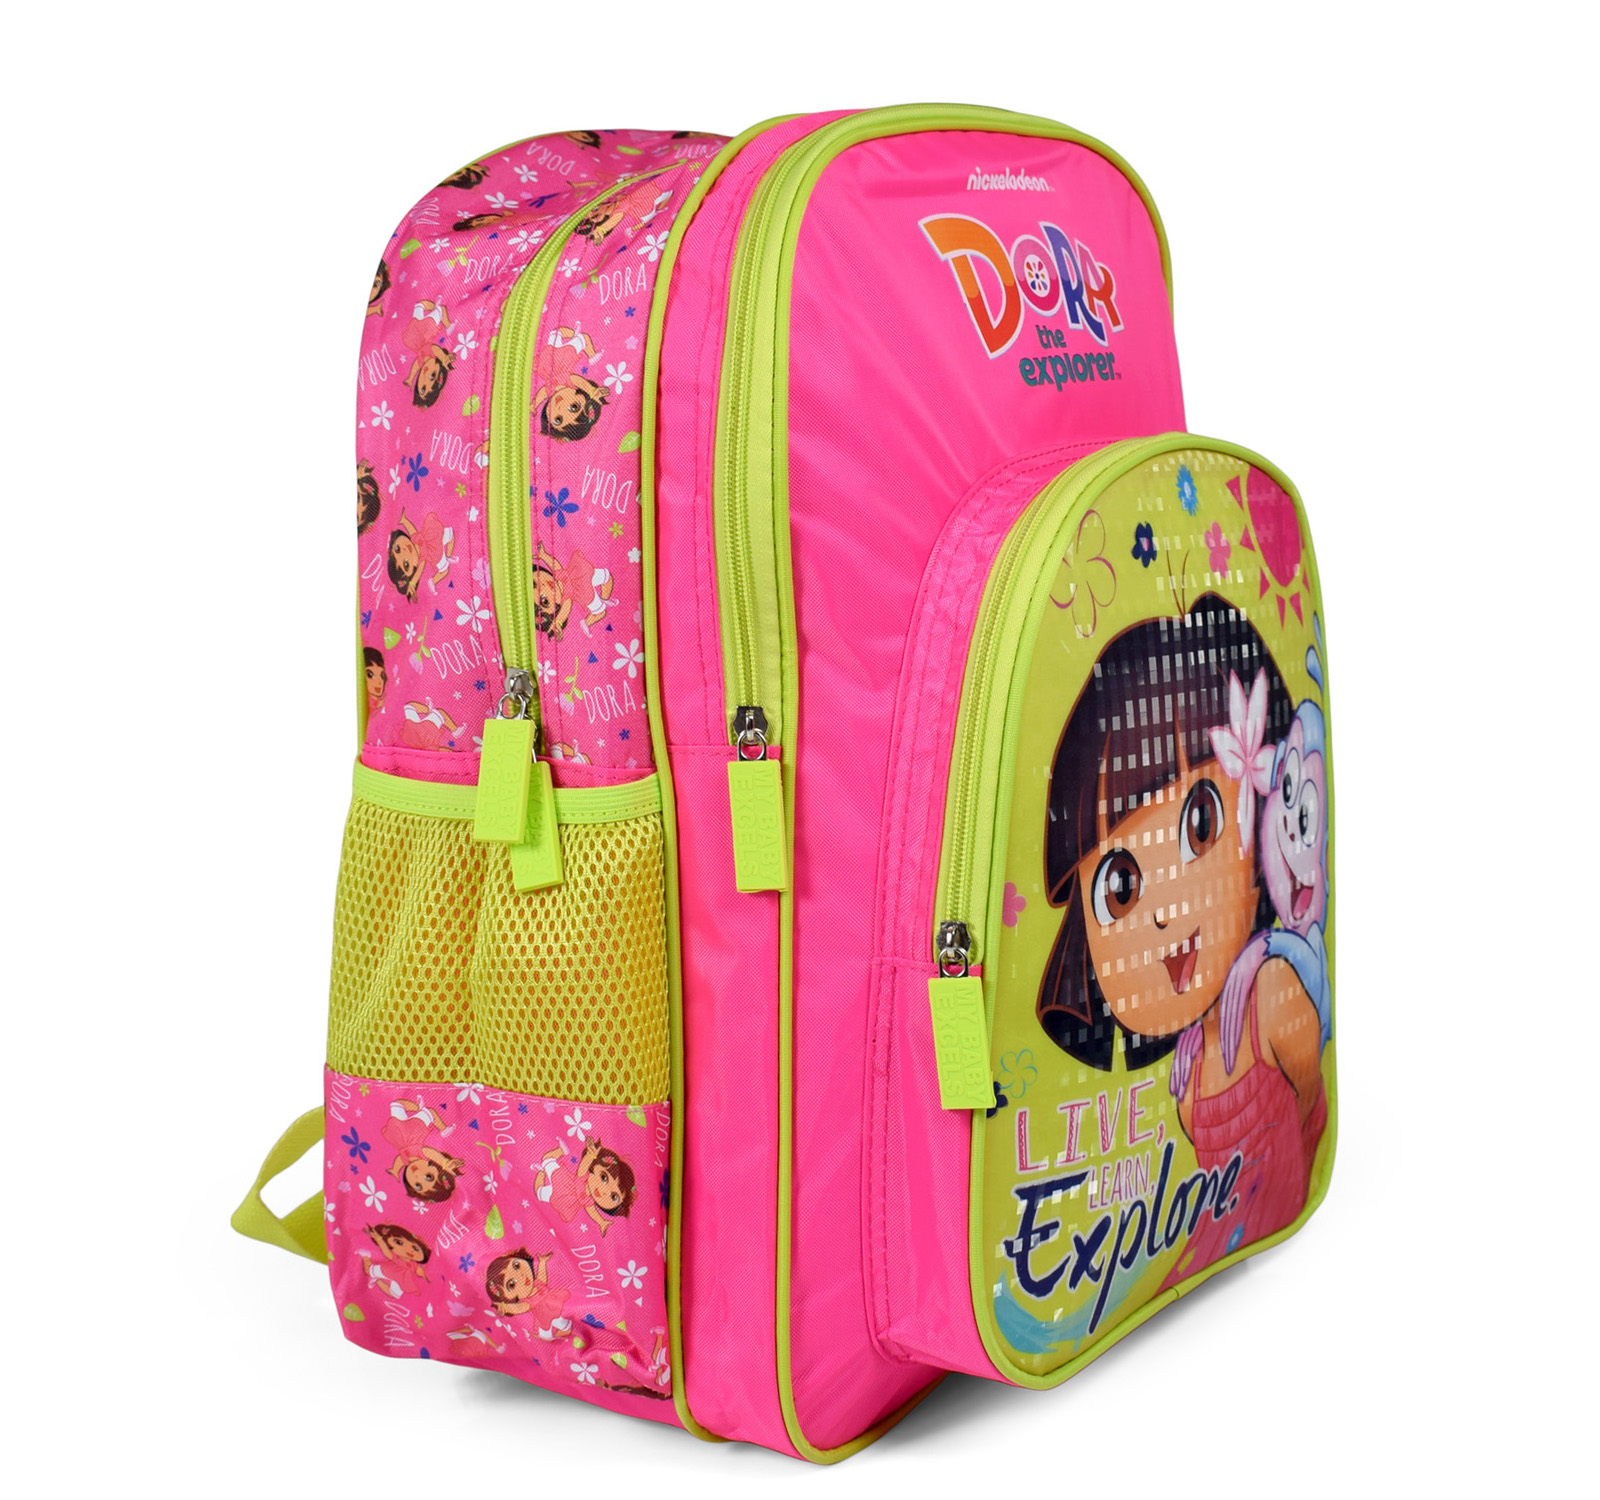 Dora - The Explorer, Upto 16 Inches - School Bags & Back Packs Online | Buy  Baby & Kids Products at FirstCry.com